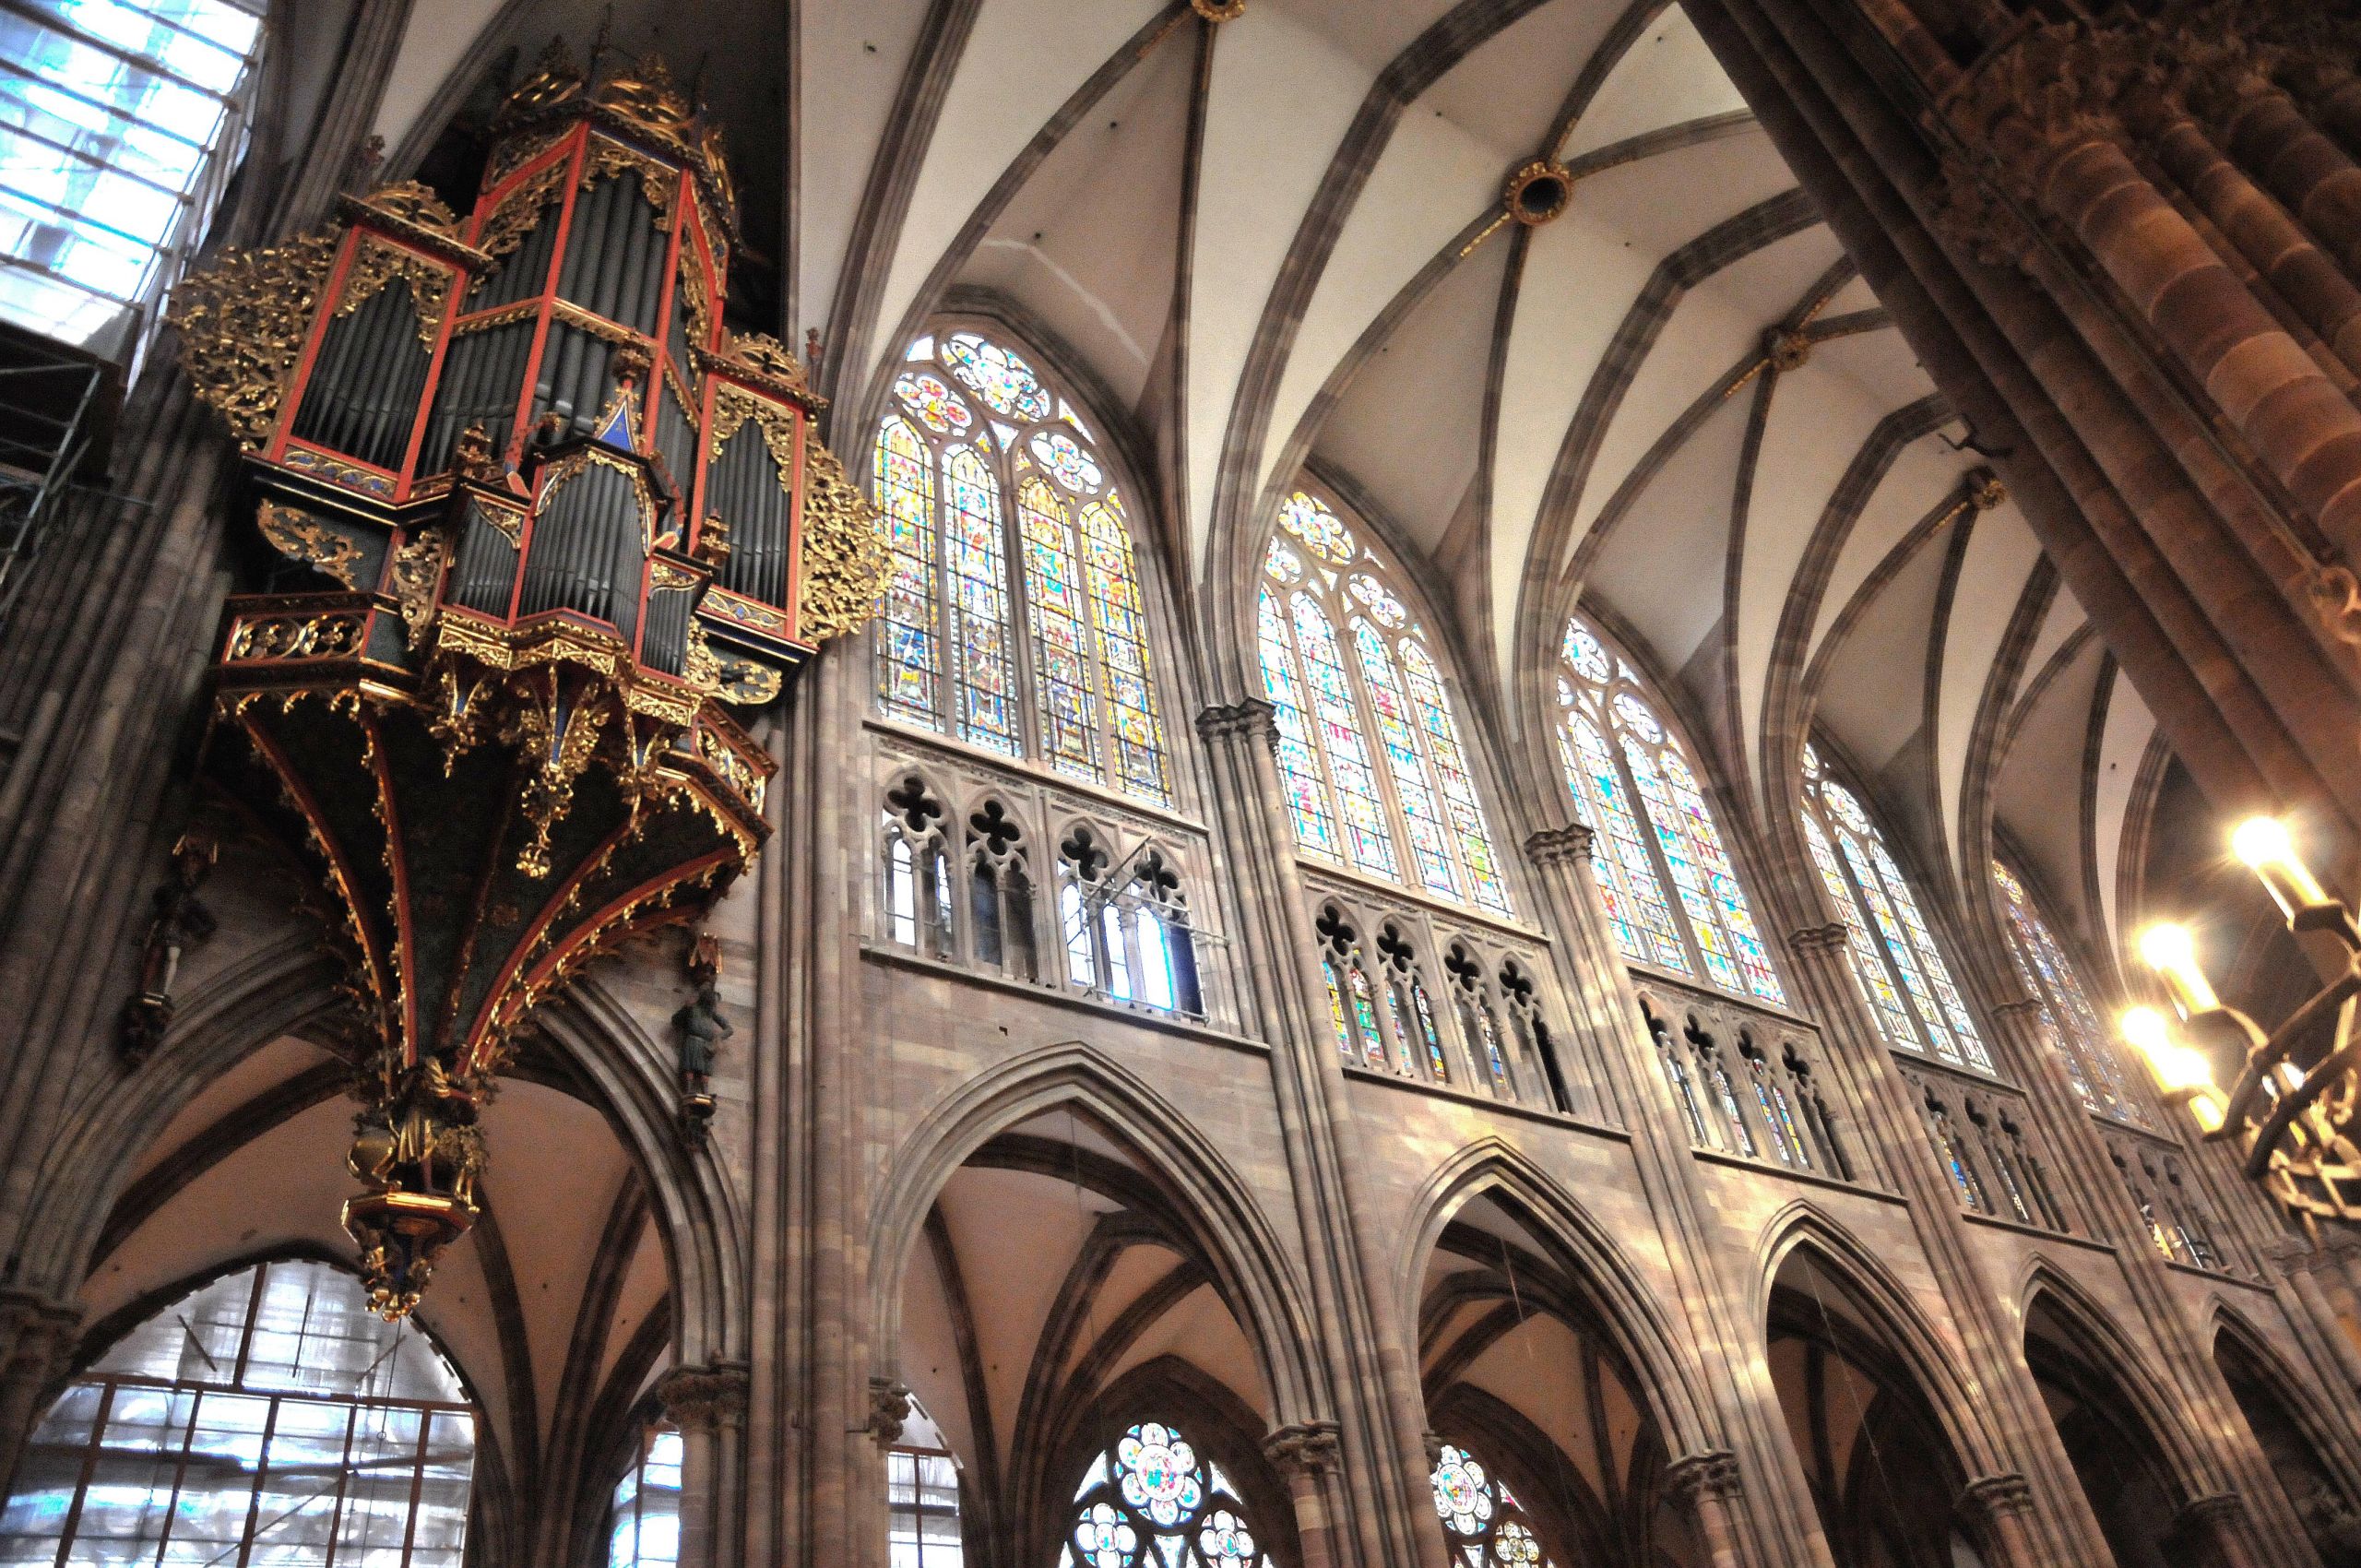 Nave organ and stained glass windows of Strasbourg Cathedral 3